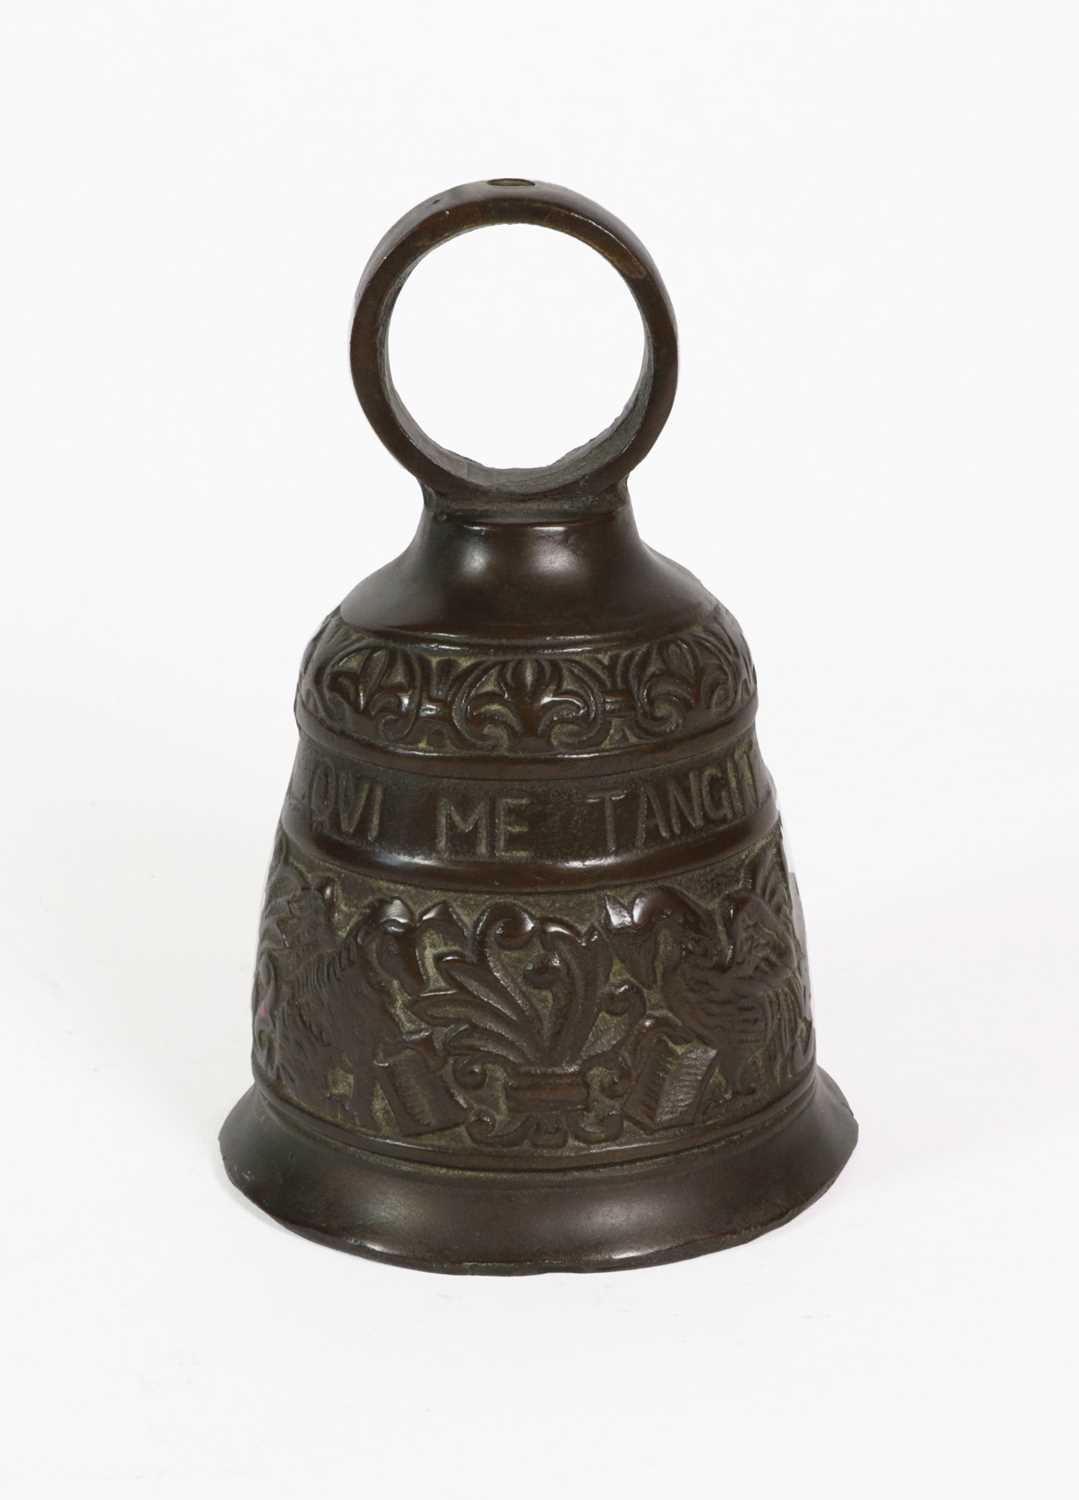 A Bronze Bell, in Byzantine style, cast with bands of beasts and foliage and inscribed VOCEM MEAM